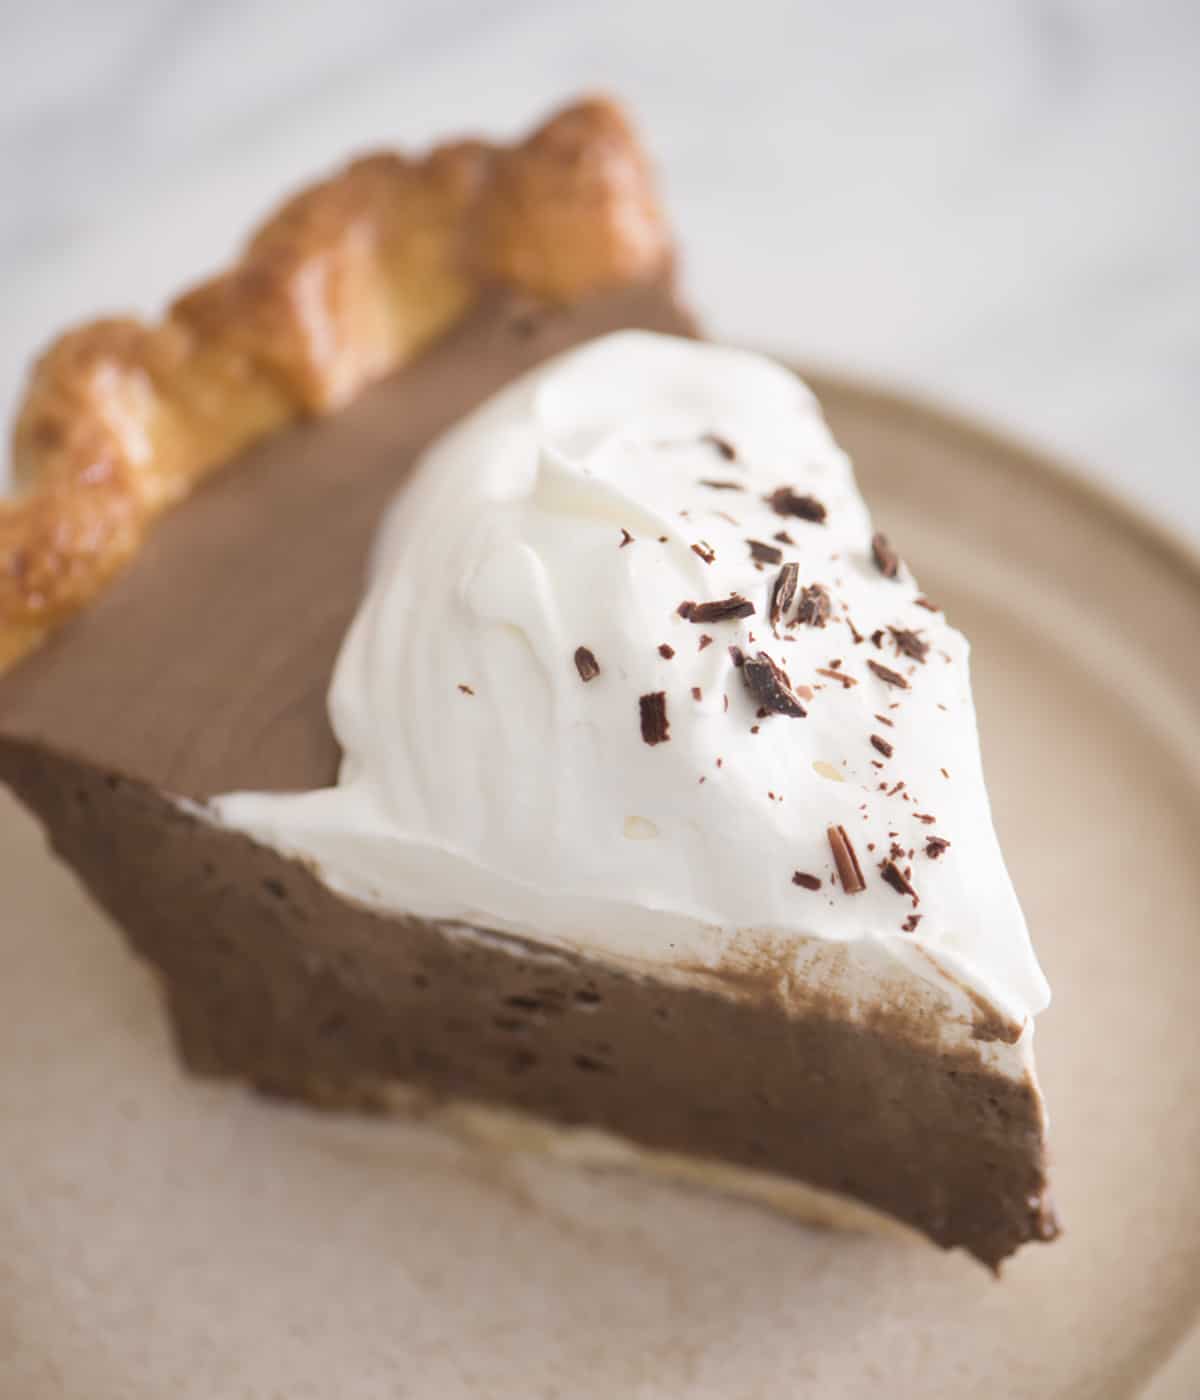 A piece of chocolate pie on a tan plate.